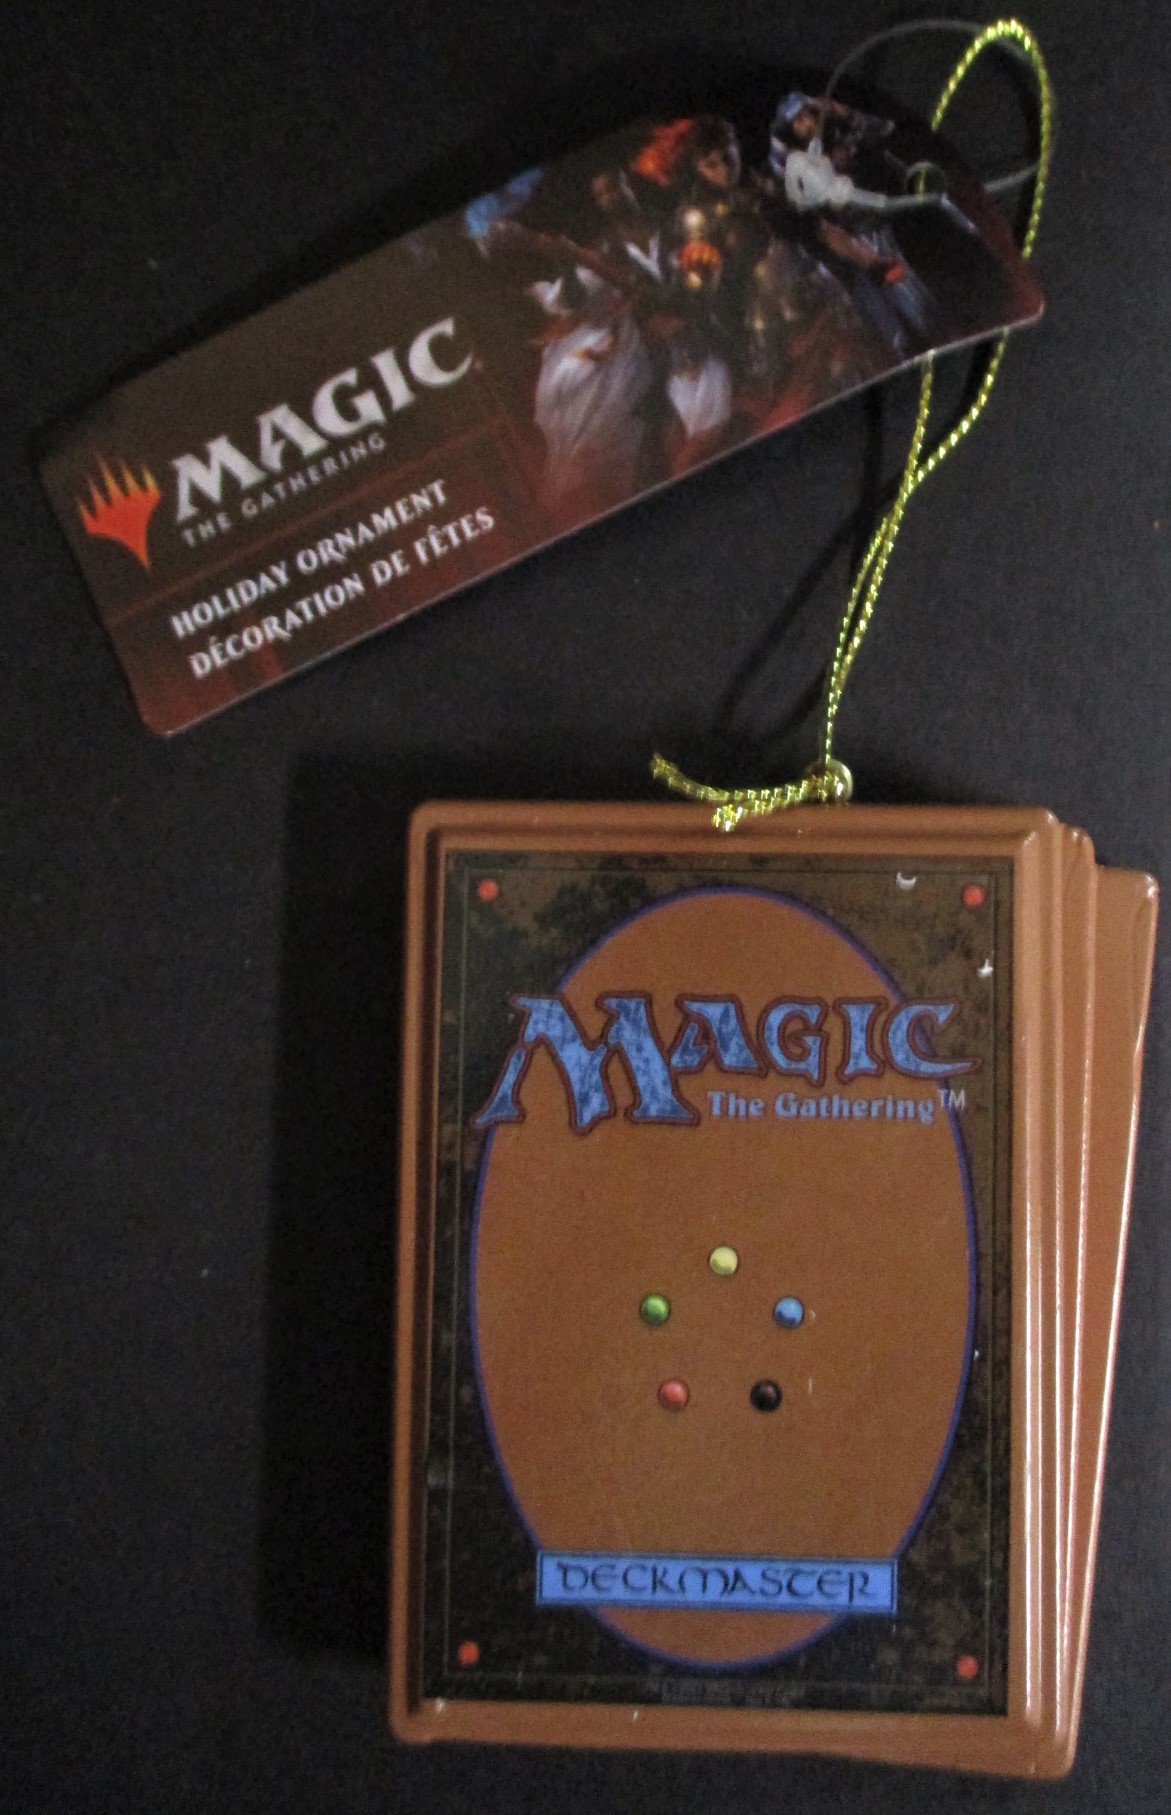 WOTC Magic the Gathering Playing Cards Holiday Ornament